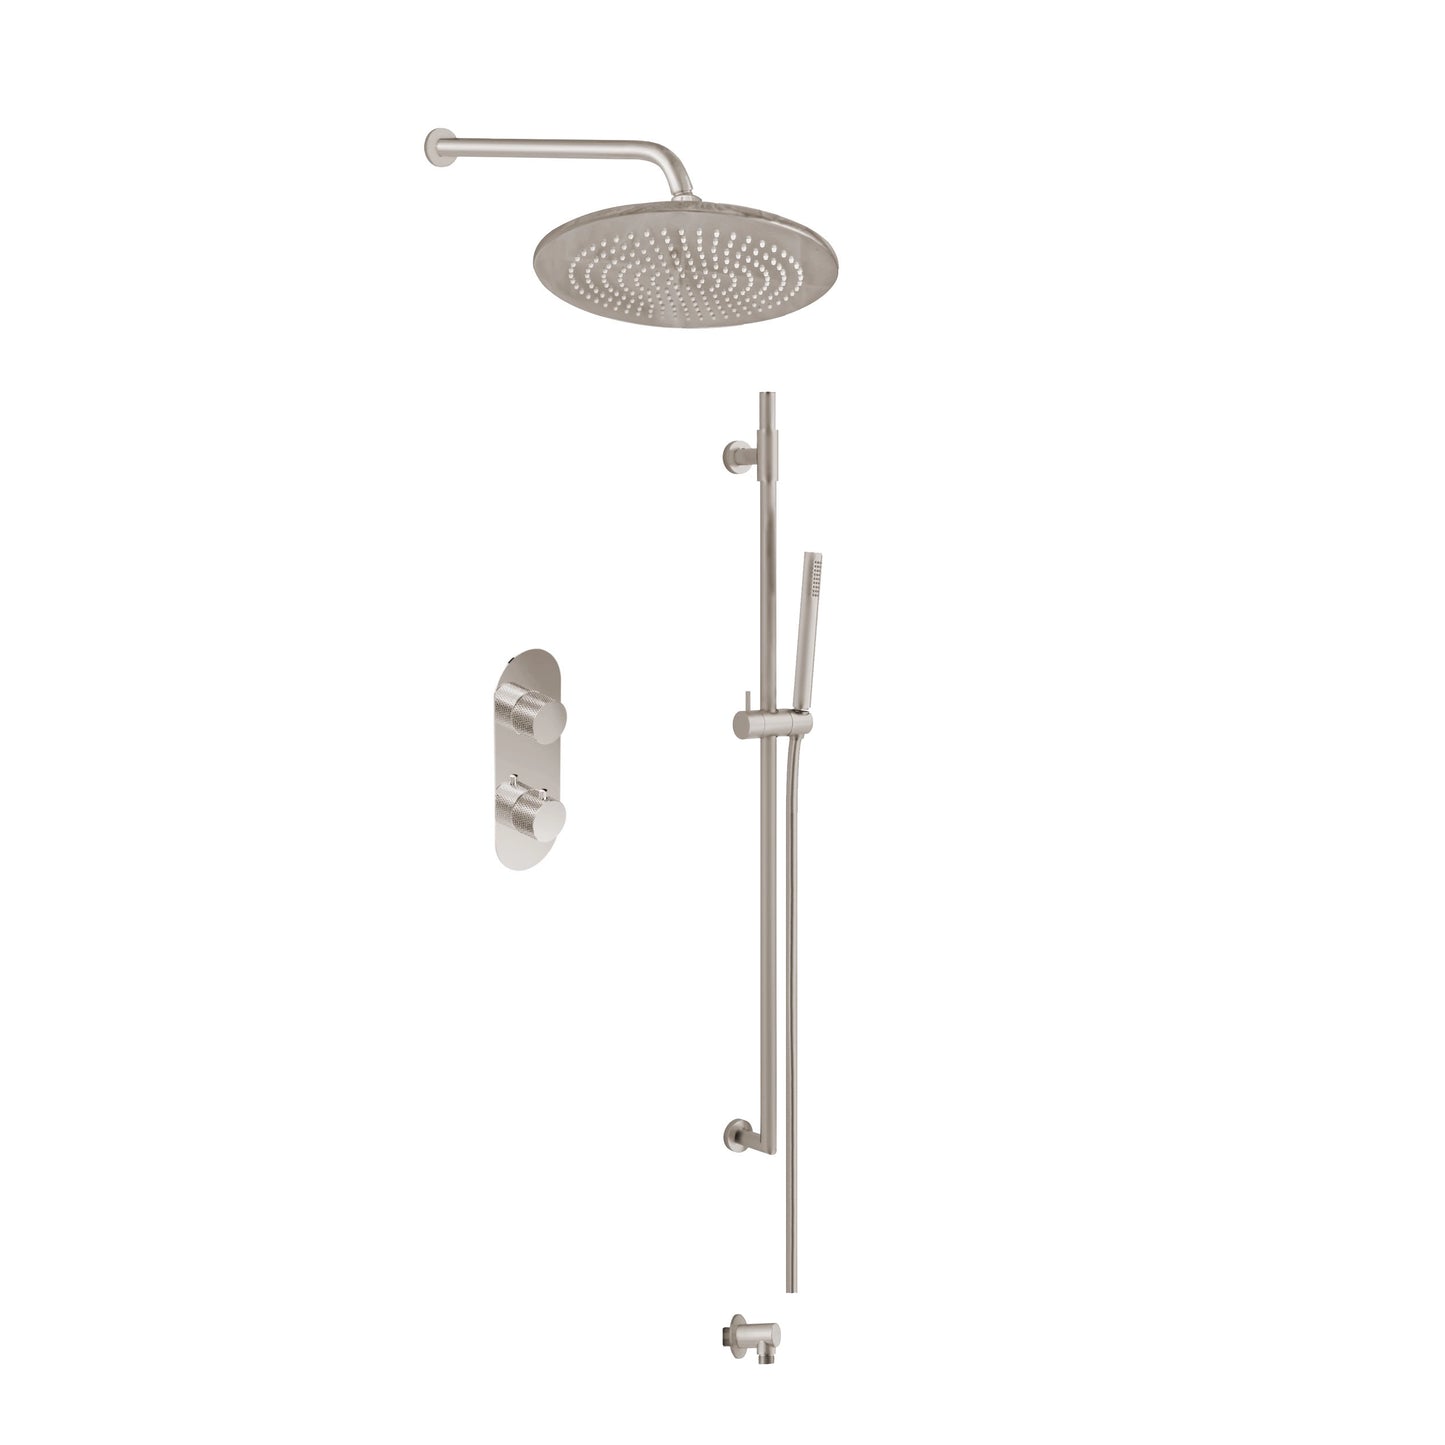 Aquadesign Products Shower Kit (Contempo X100CT-A) - Brushed Nickel